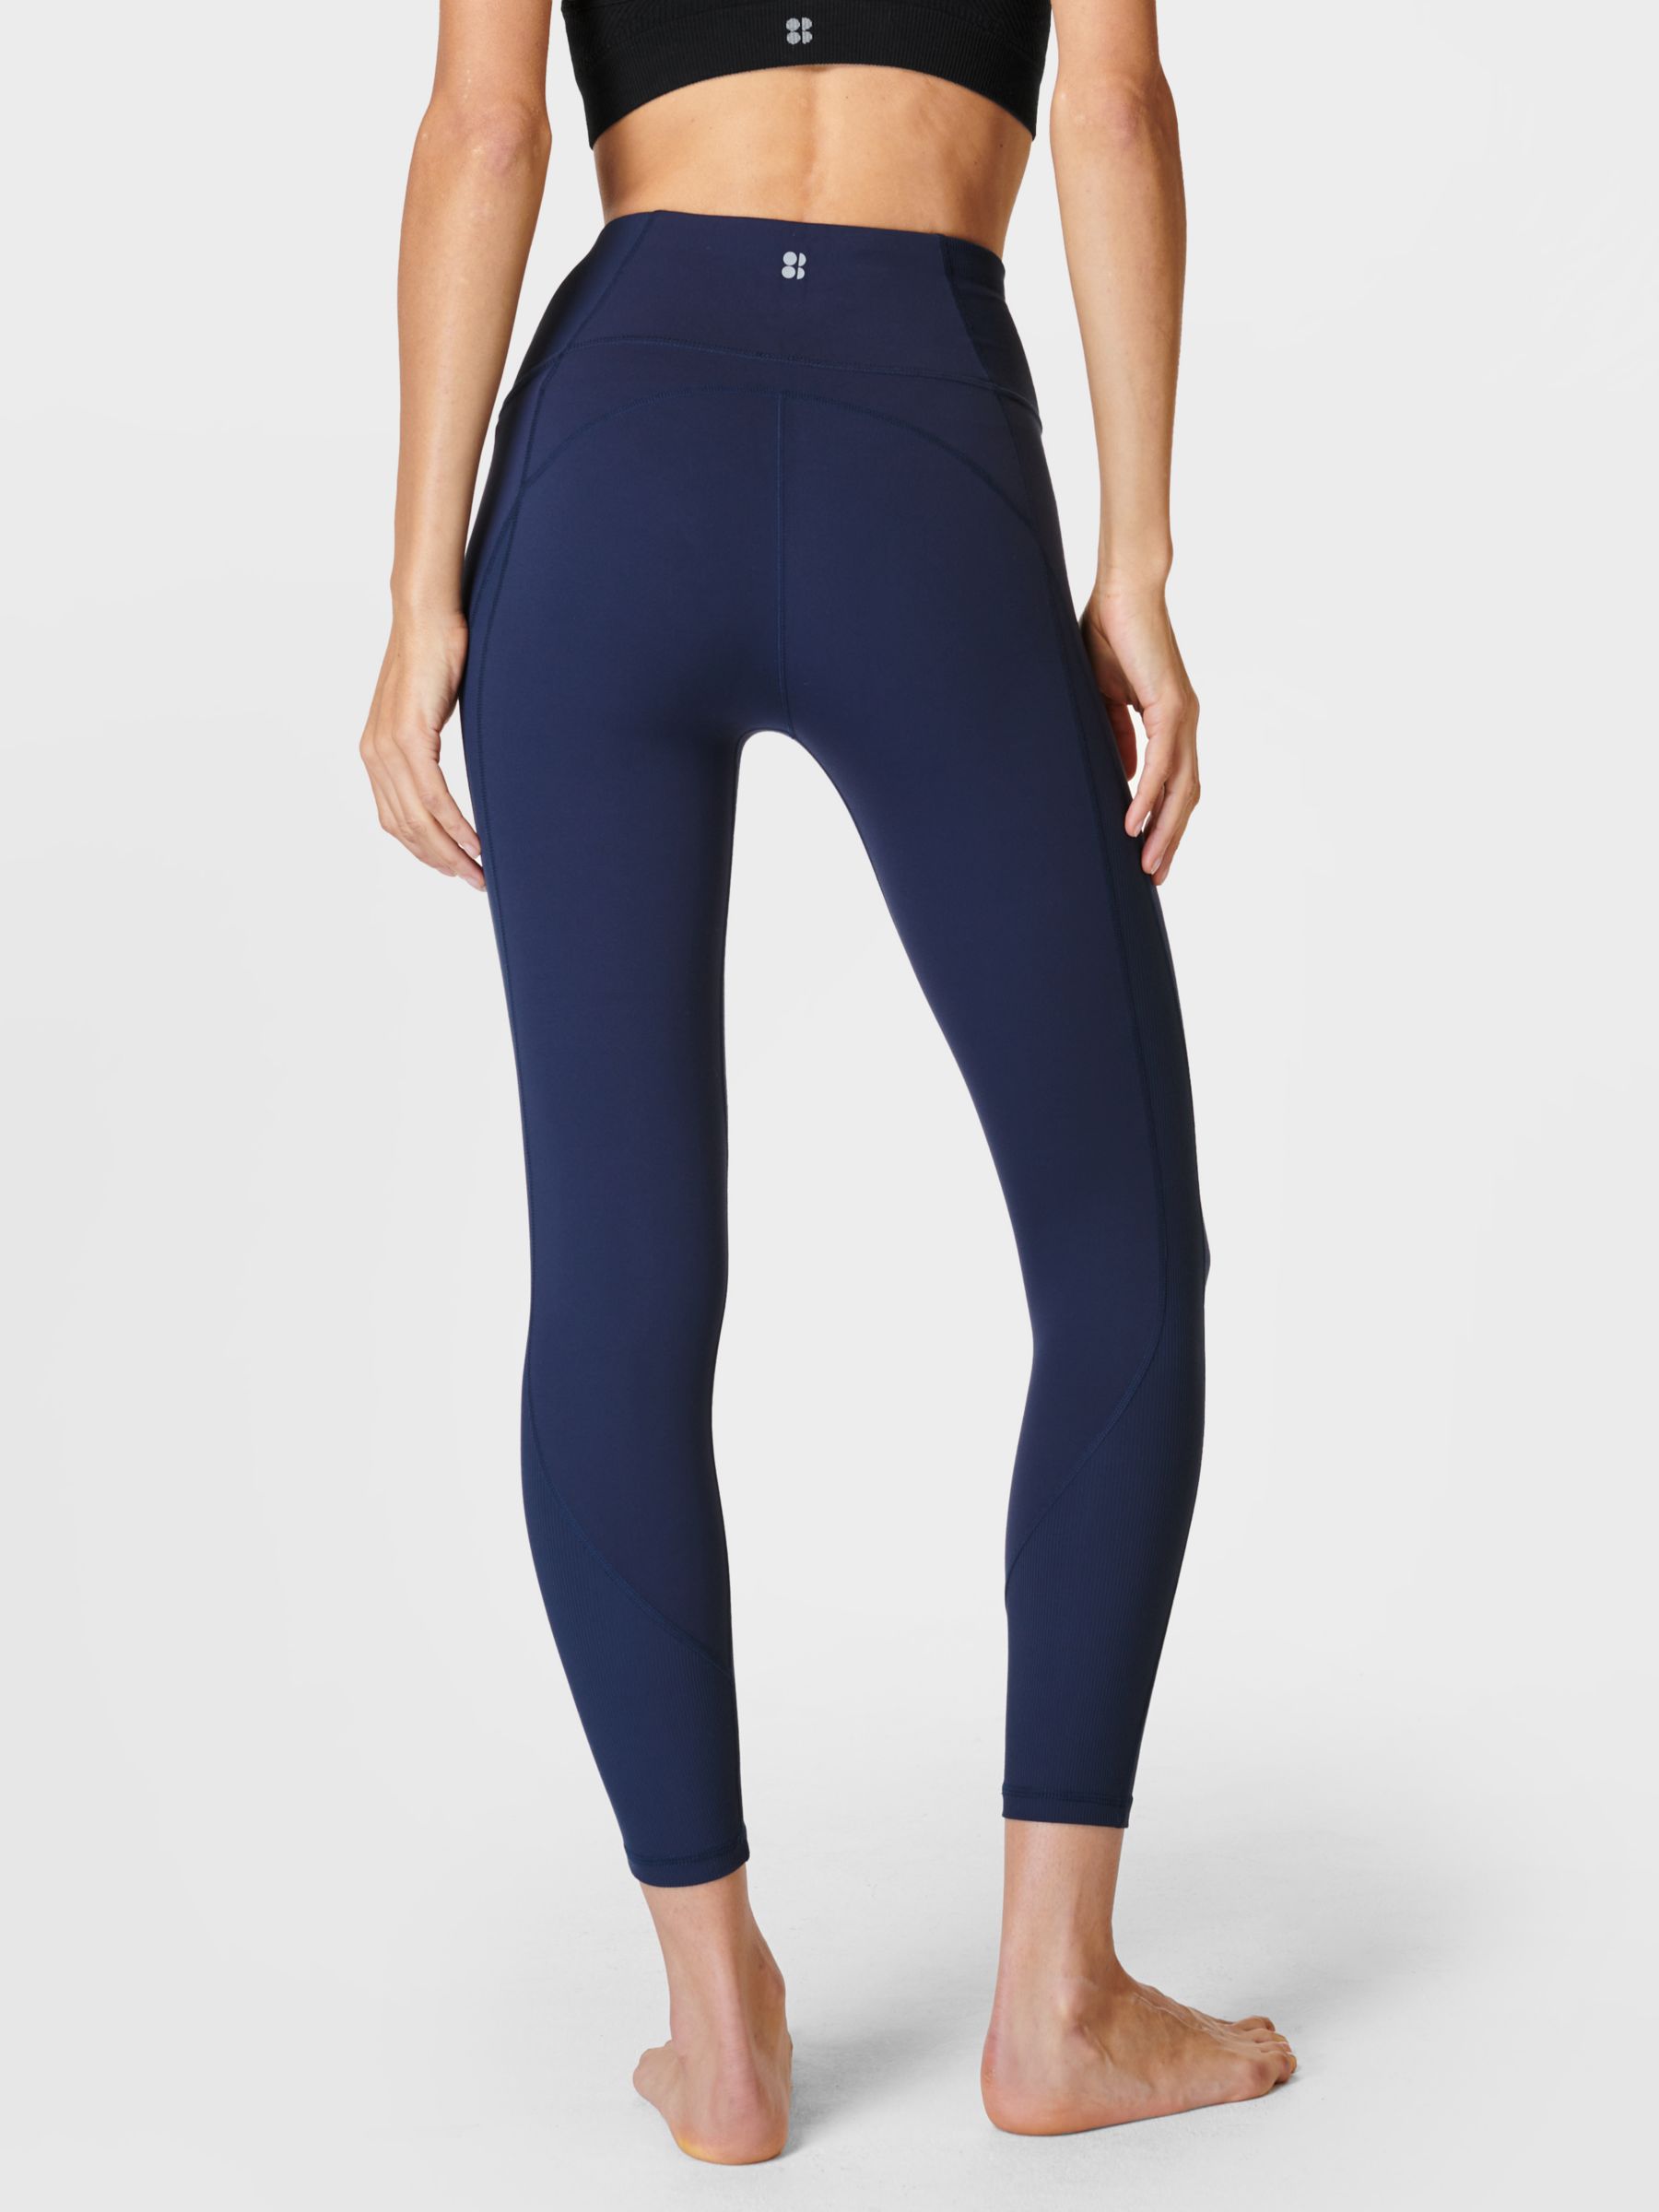 Sweaty Betty Silhouette Sculpt Seamless Workout Leggings, Reef Teal/Navy  Blue at John Lewis & Partners